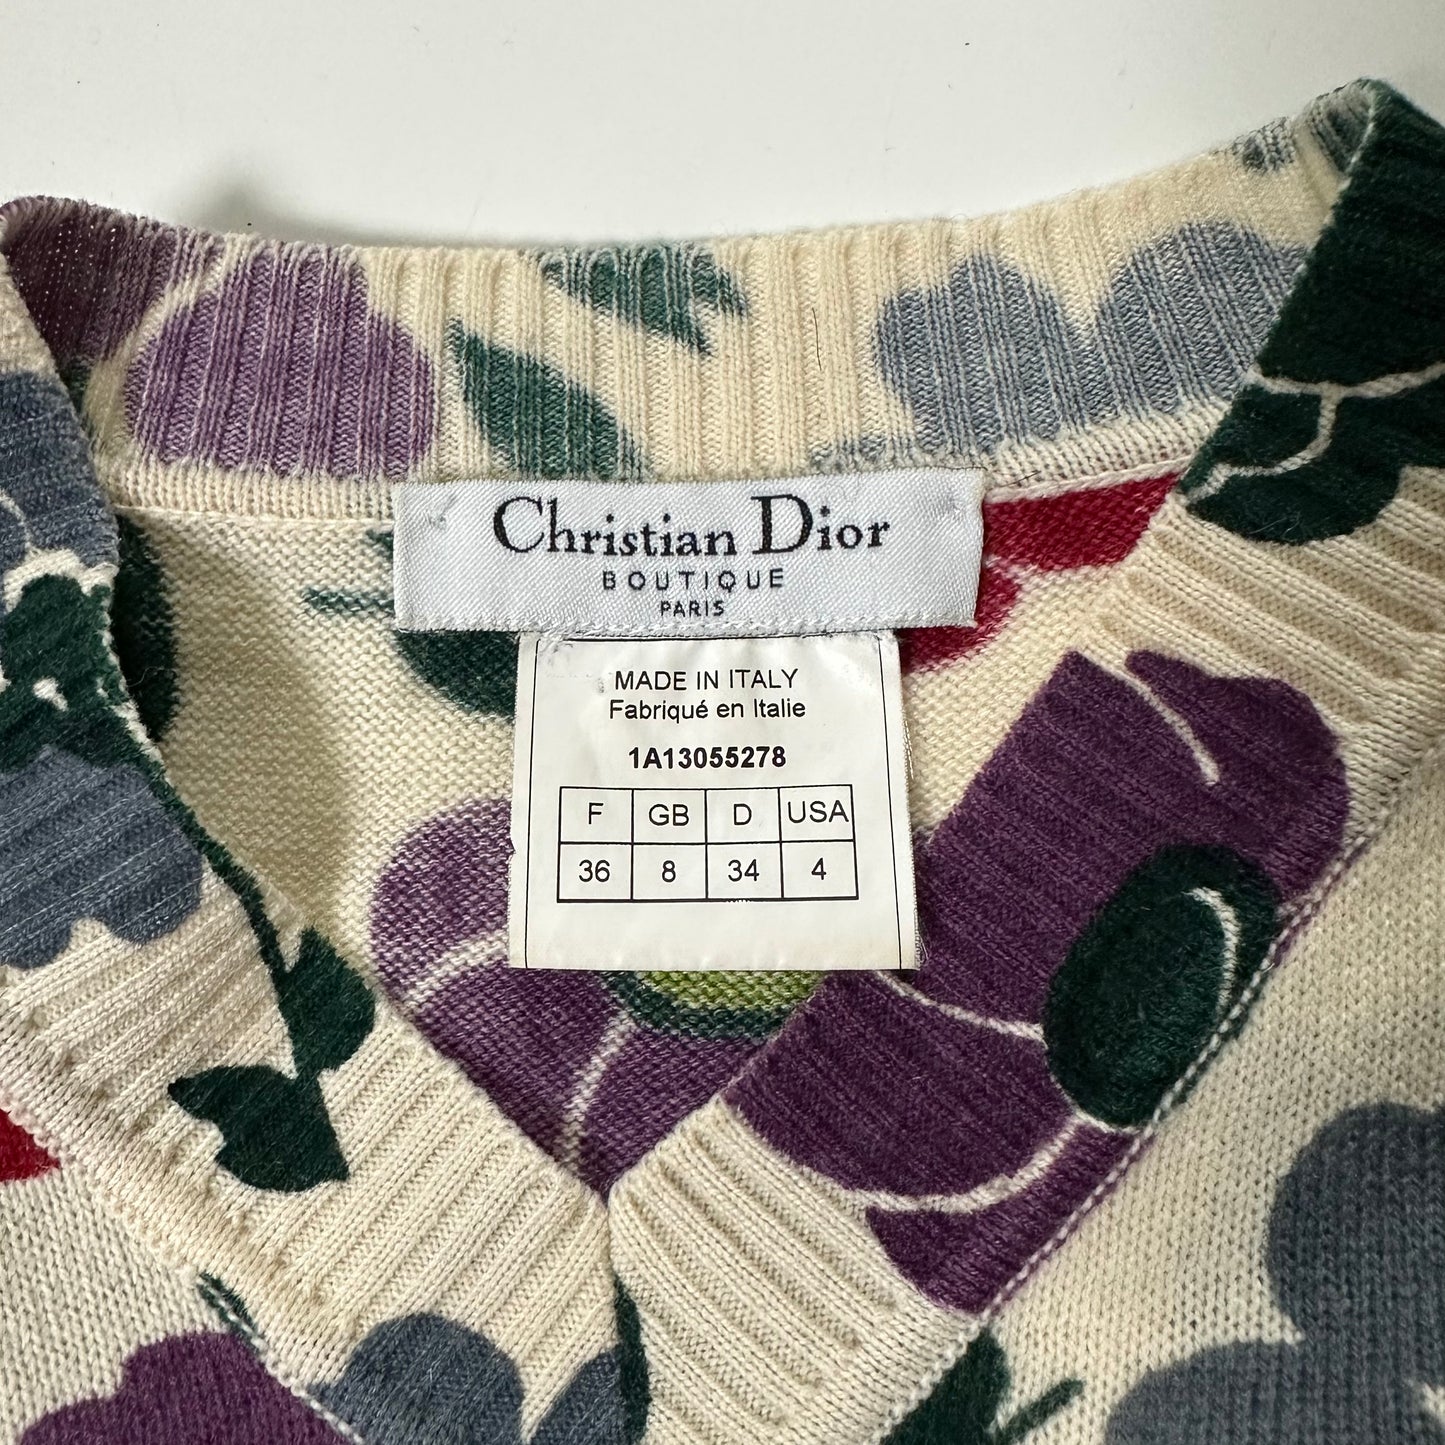 CHRISTIAN DIOR Fall Winter 2001 V-neck Floral Print Knit Sweater